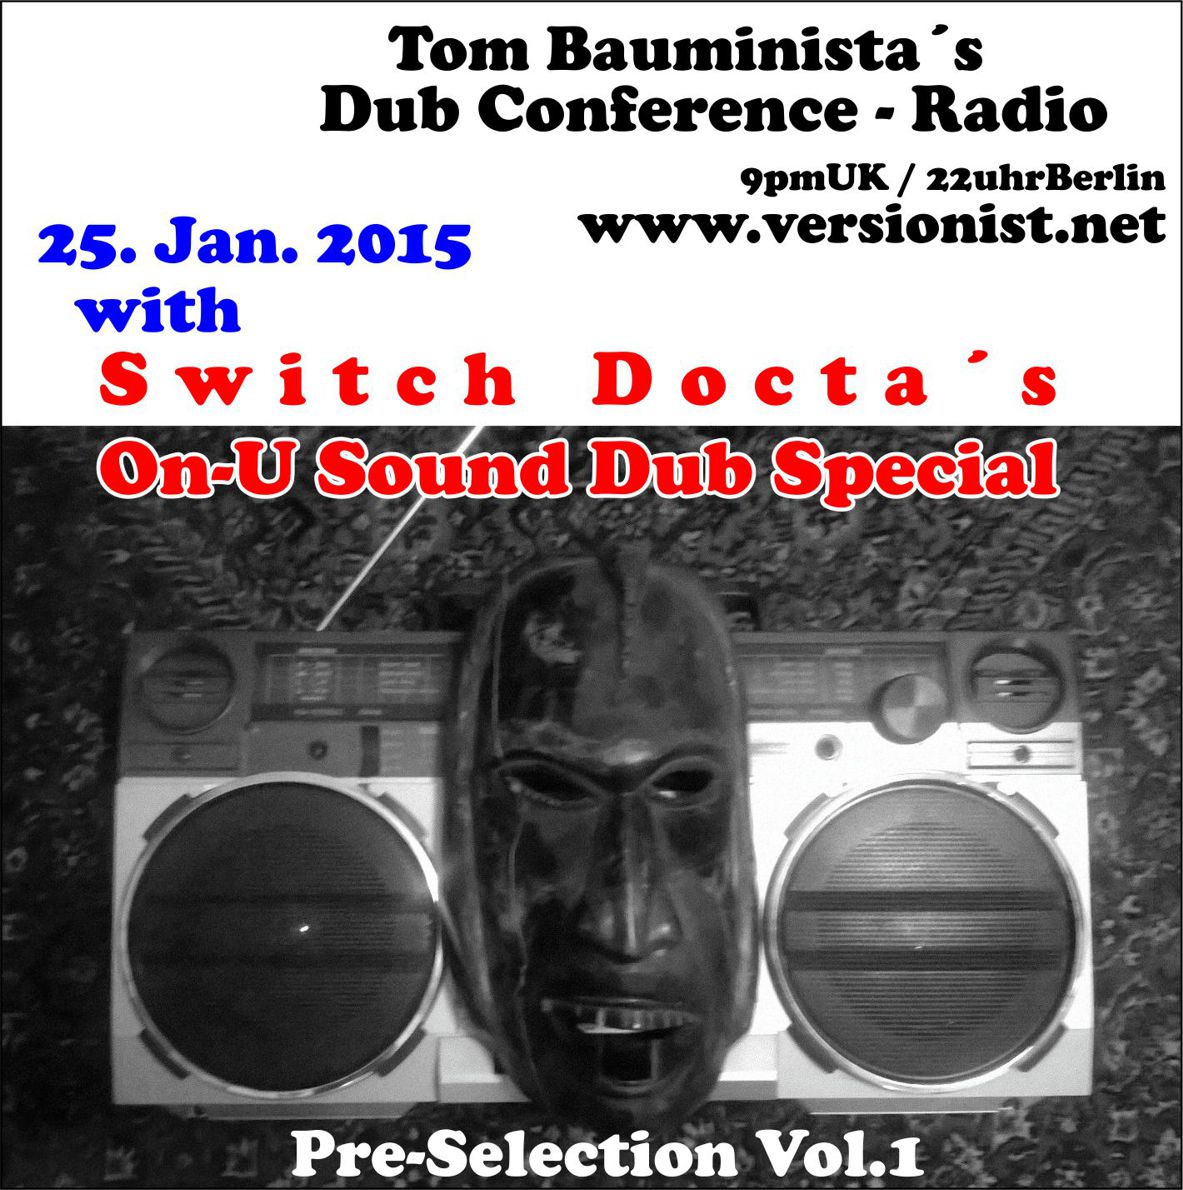 On-U Sound Dub Special - the Switch Docta pre-selection pt.1